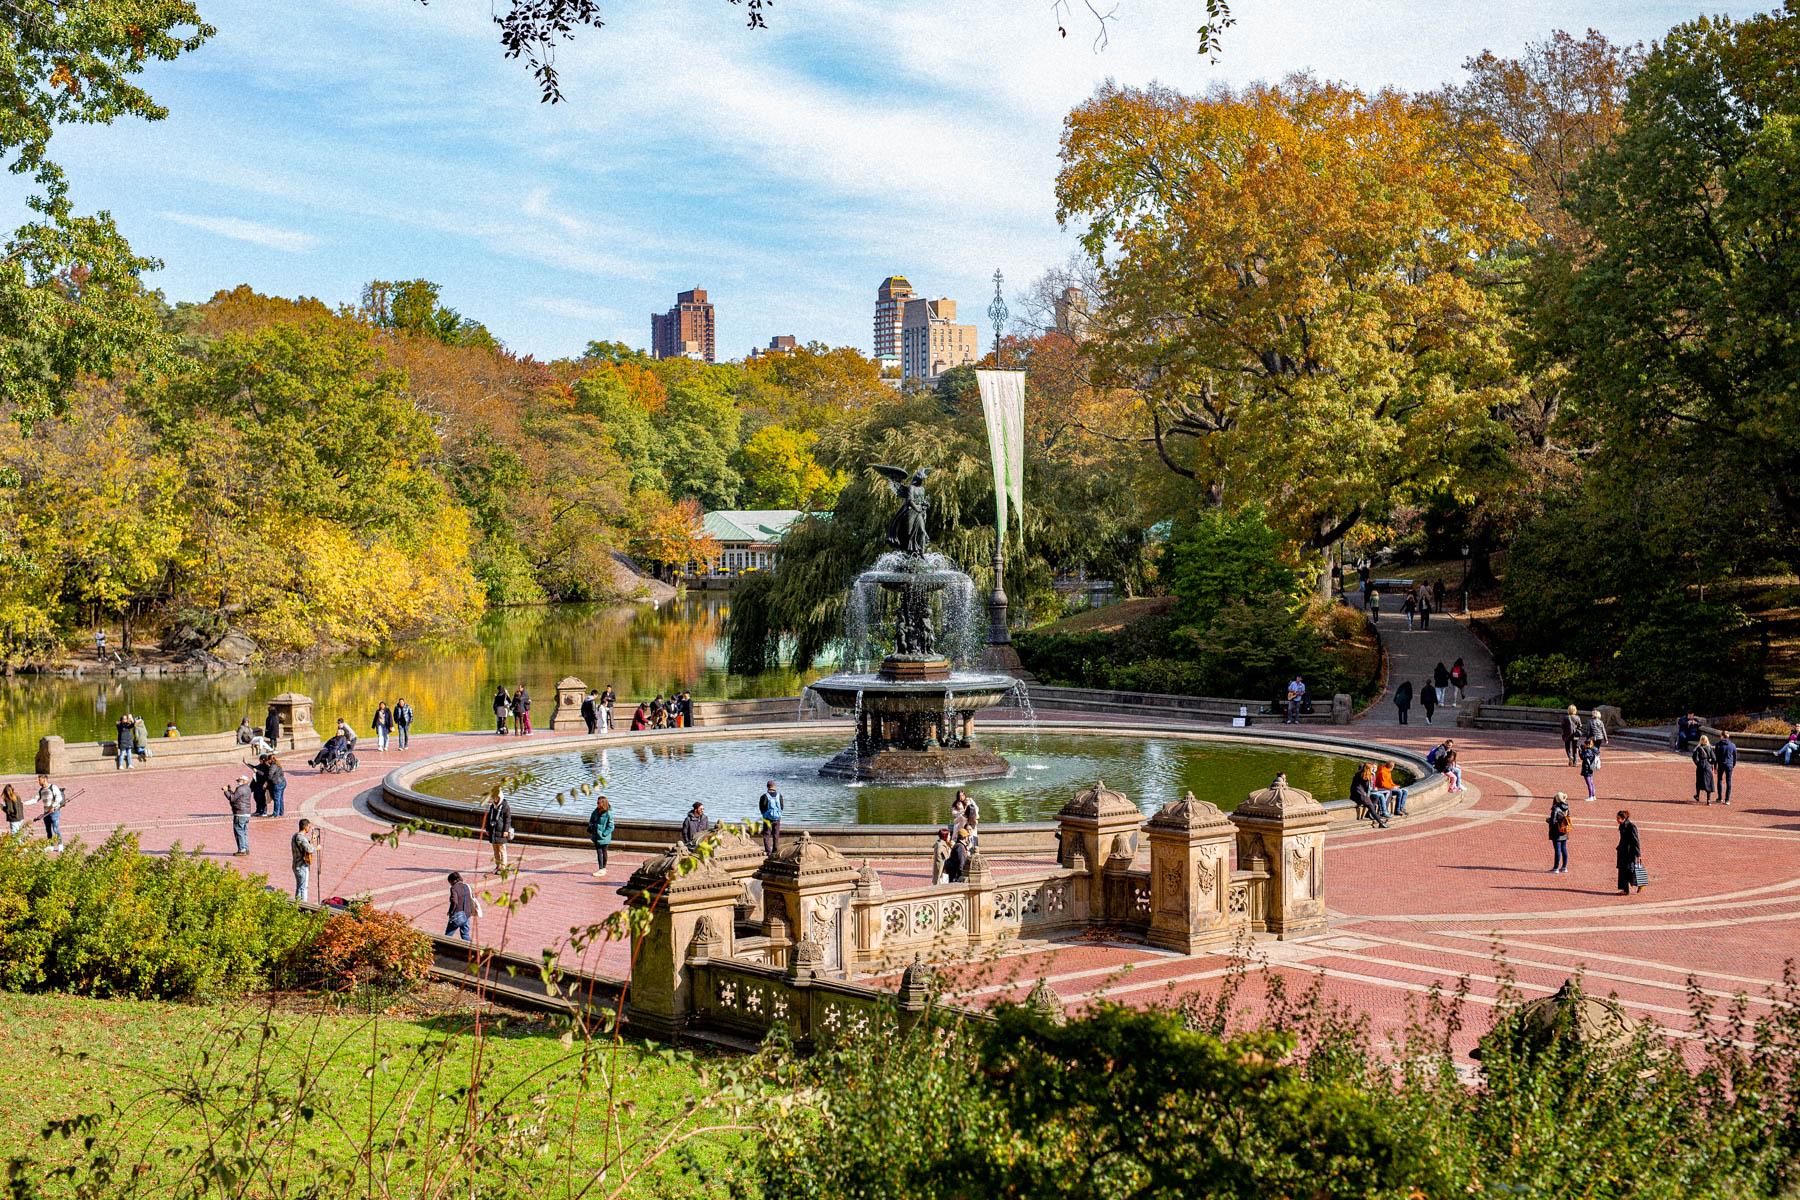 Interesting facts about Central Park